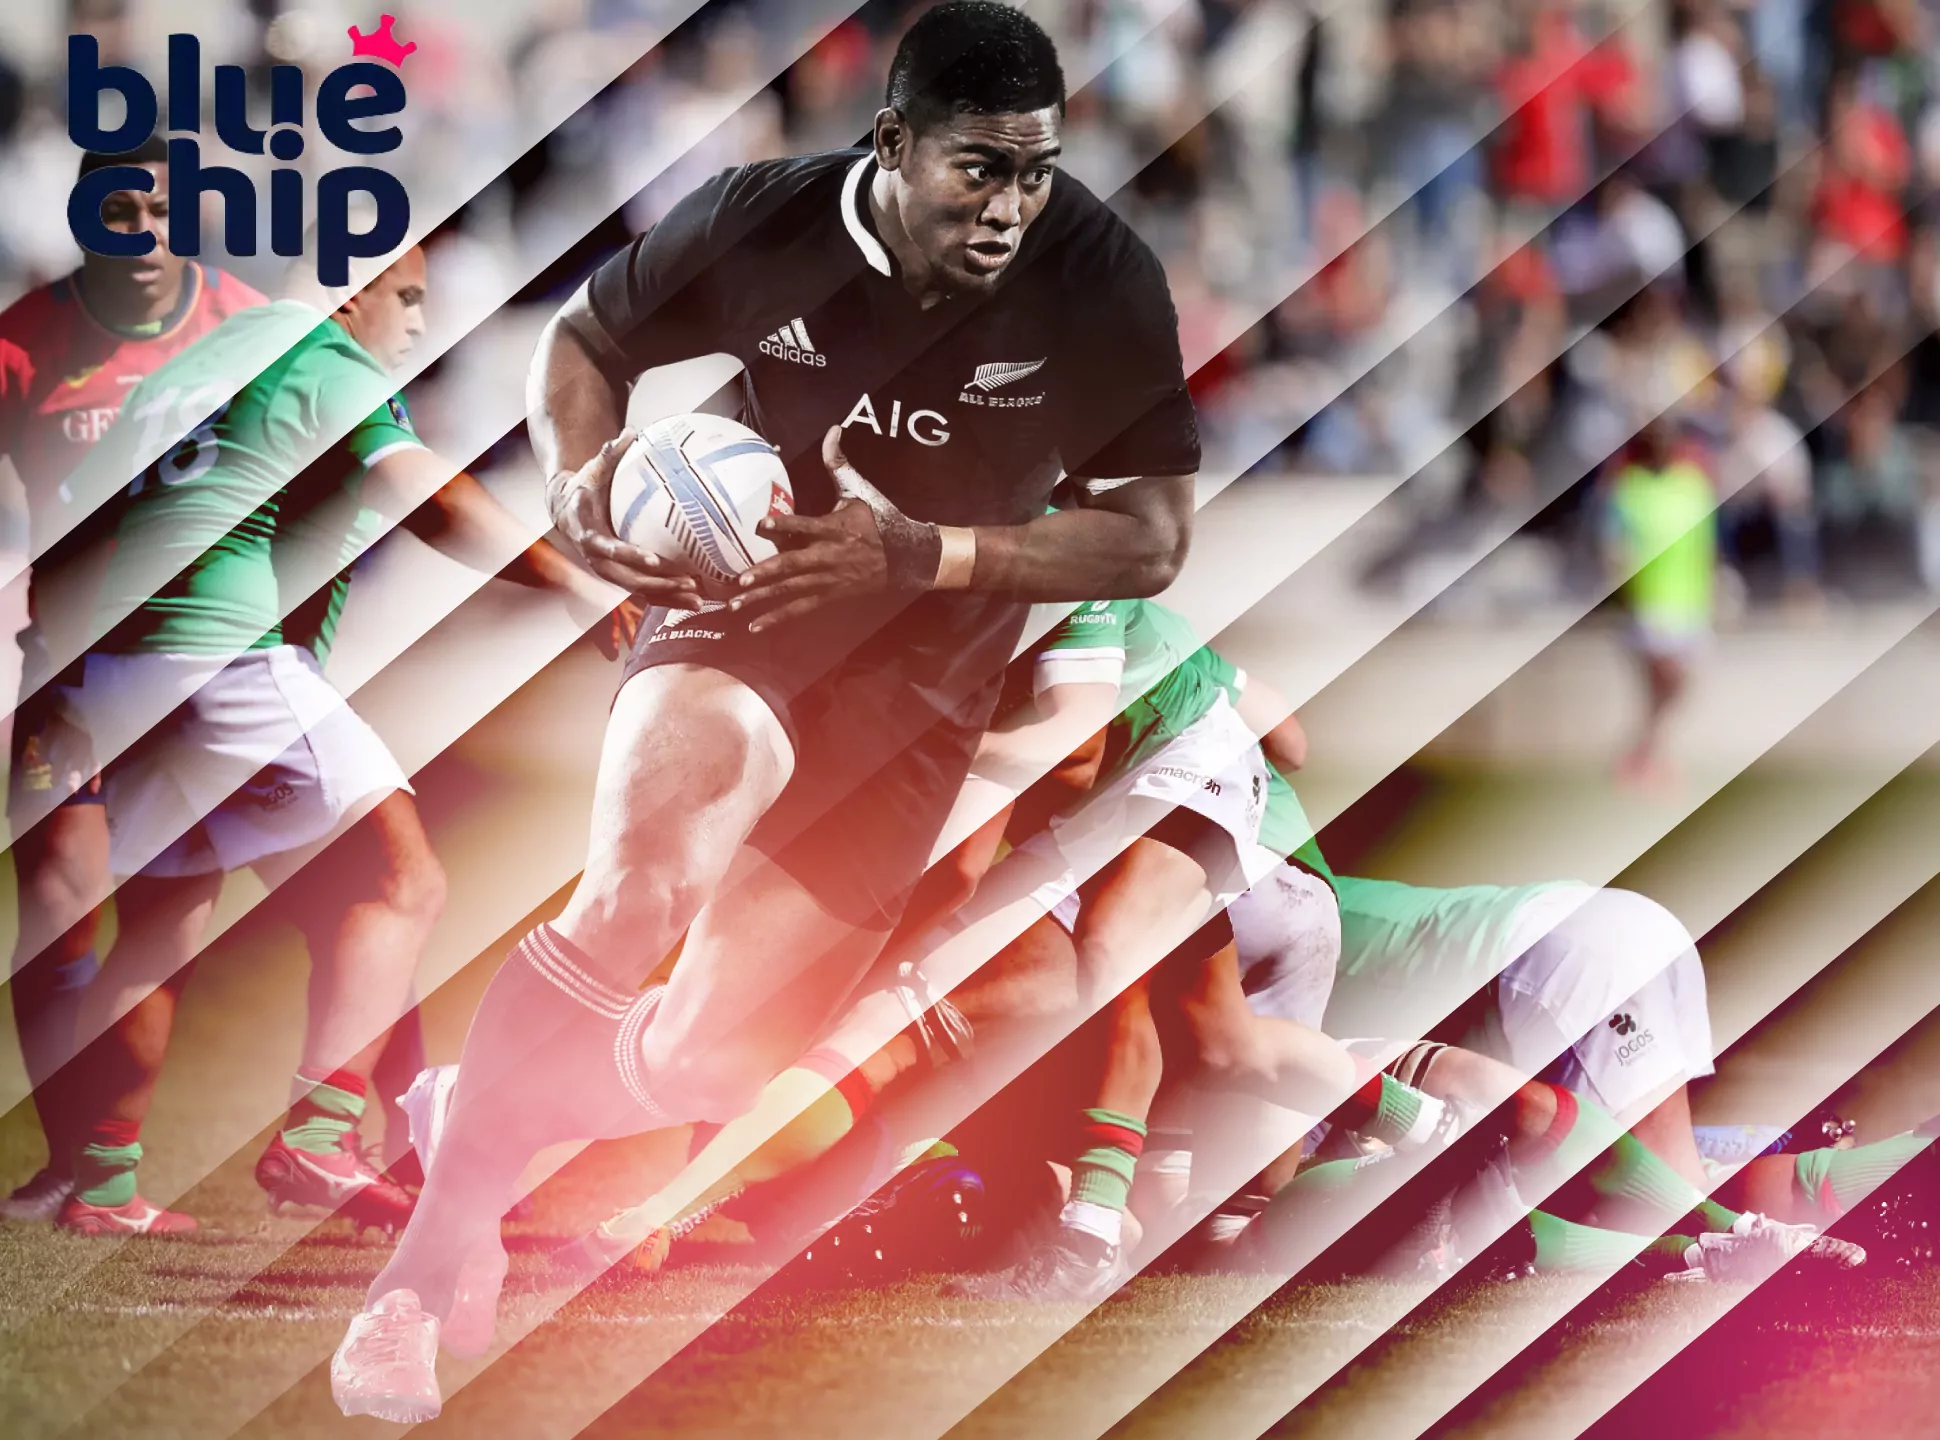 Bet on rugby championships on the Bluechip website.